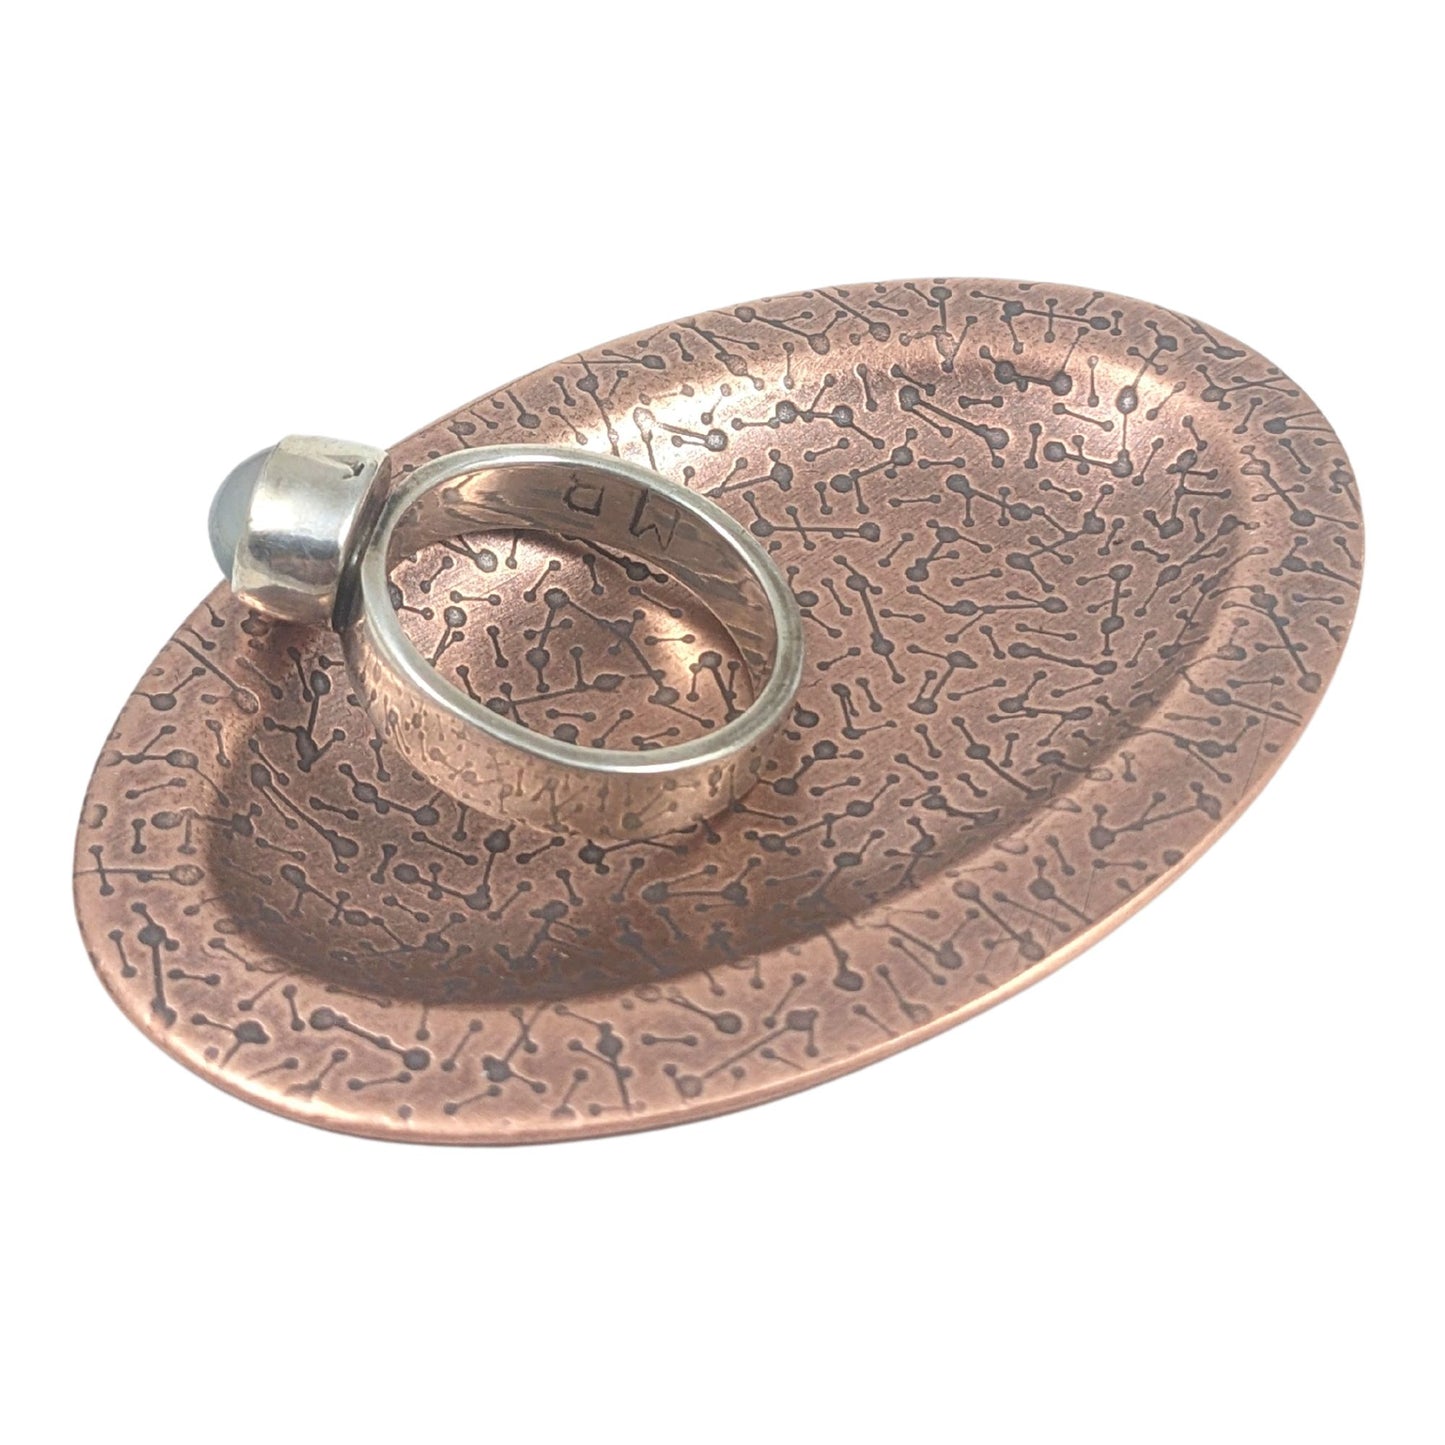 Oval ring dish made of copper. The dish has a shallow bowl with a lip around the edge. It is covered in a pattern meant to represent a meteor shower. The pattern is impressed into the copper and is short lines with small solid circles at the end. The design is oxidized, which means the impressed parts are dark, almost black. Staged with a ring.